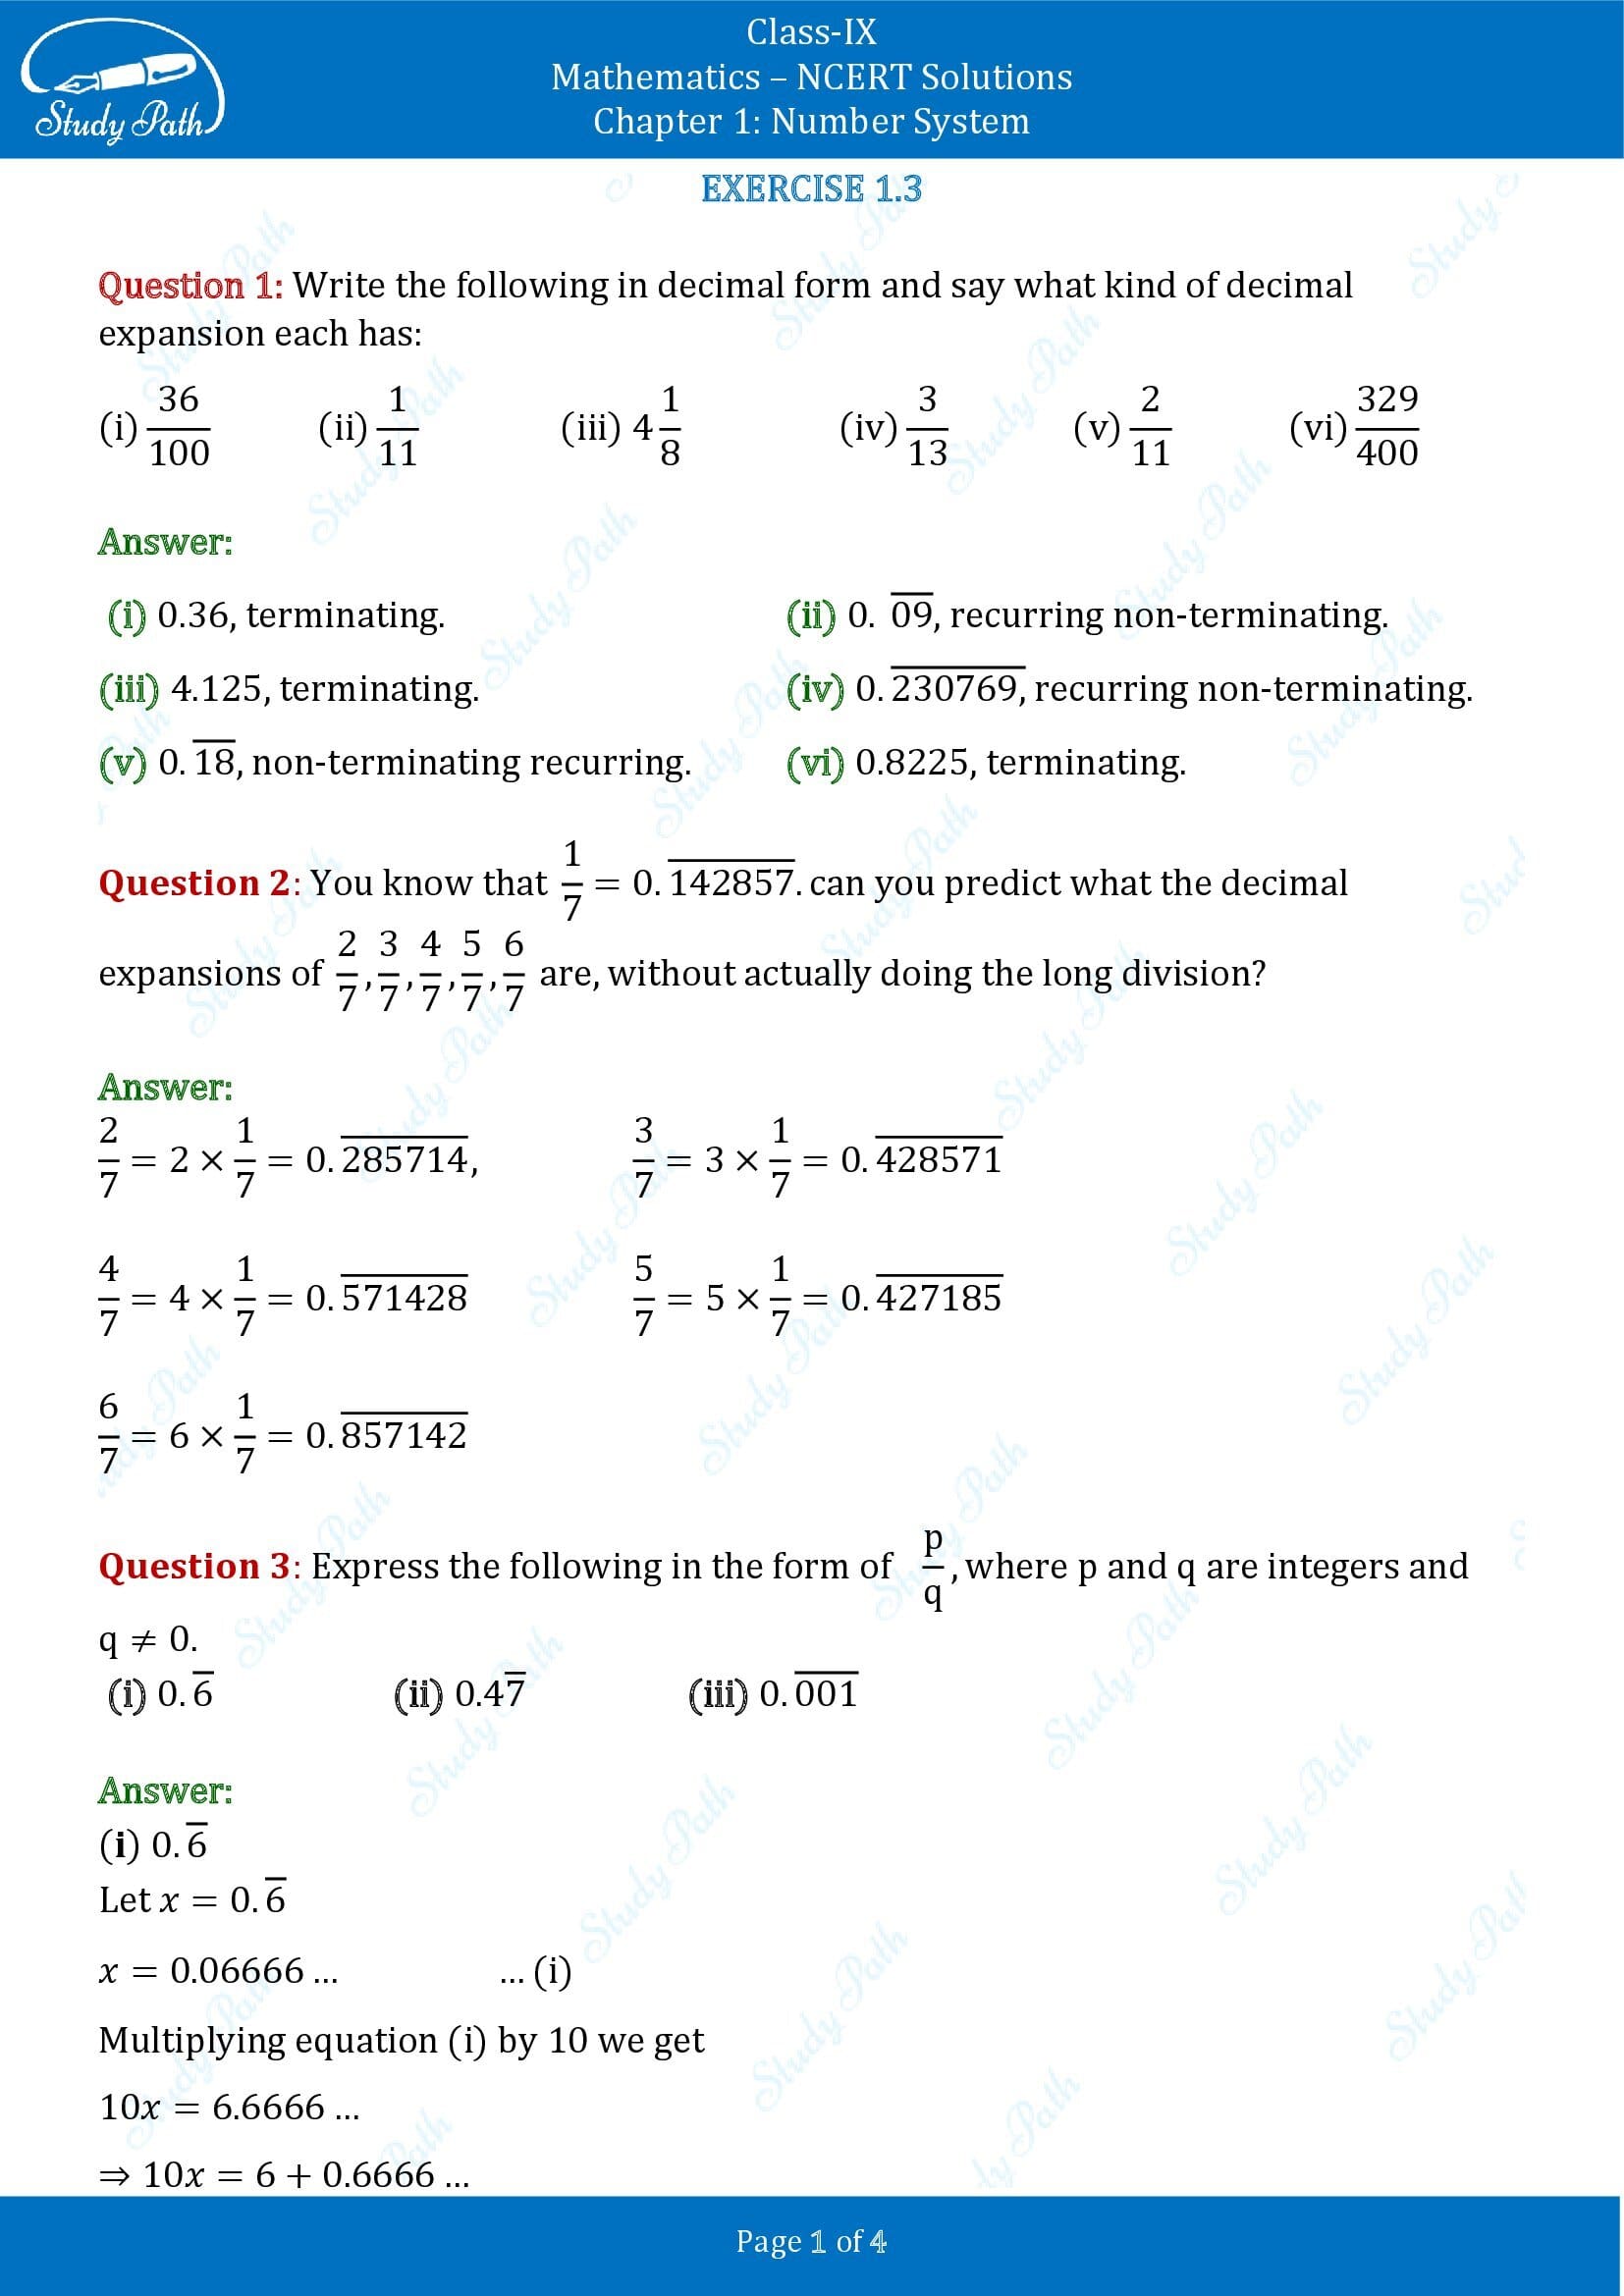 NCERT Solutions for Class 9 Maths Chapter 1 Number System Exercise 1.3 00001